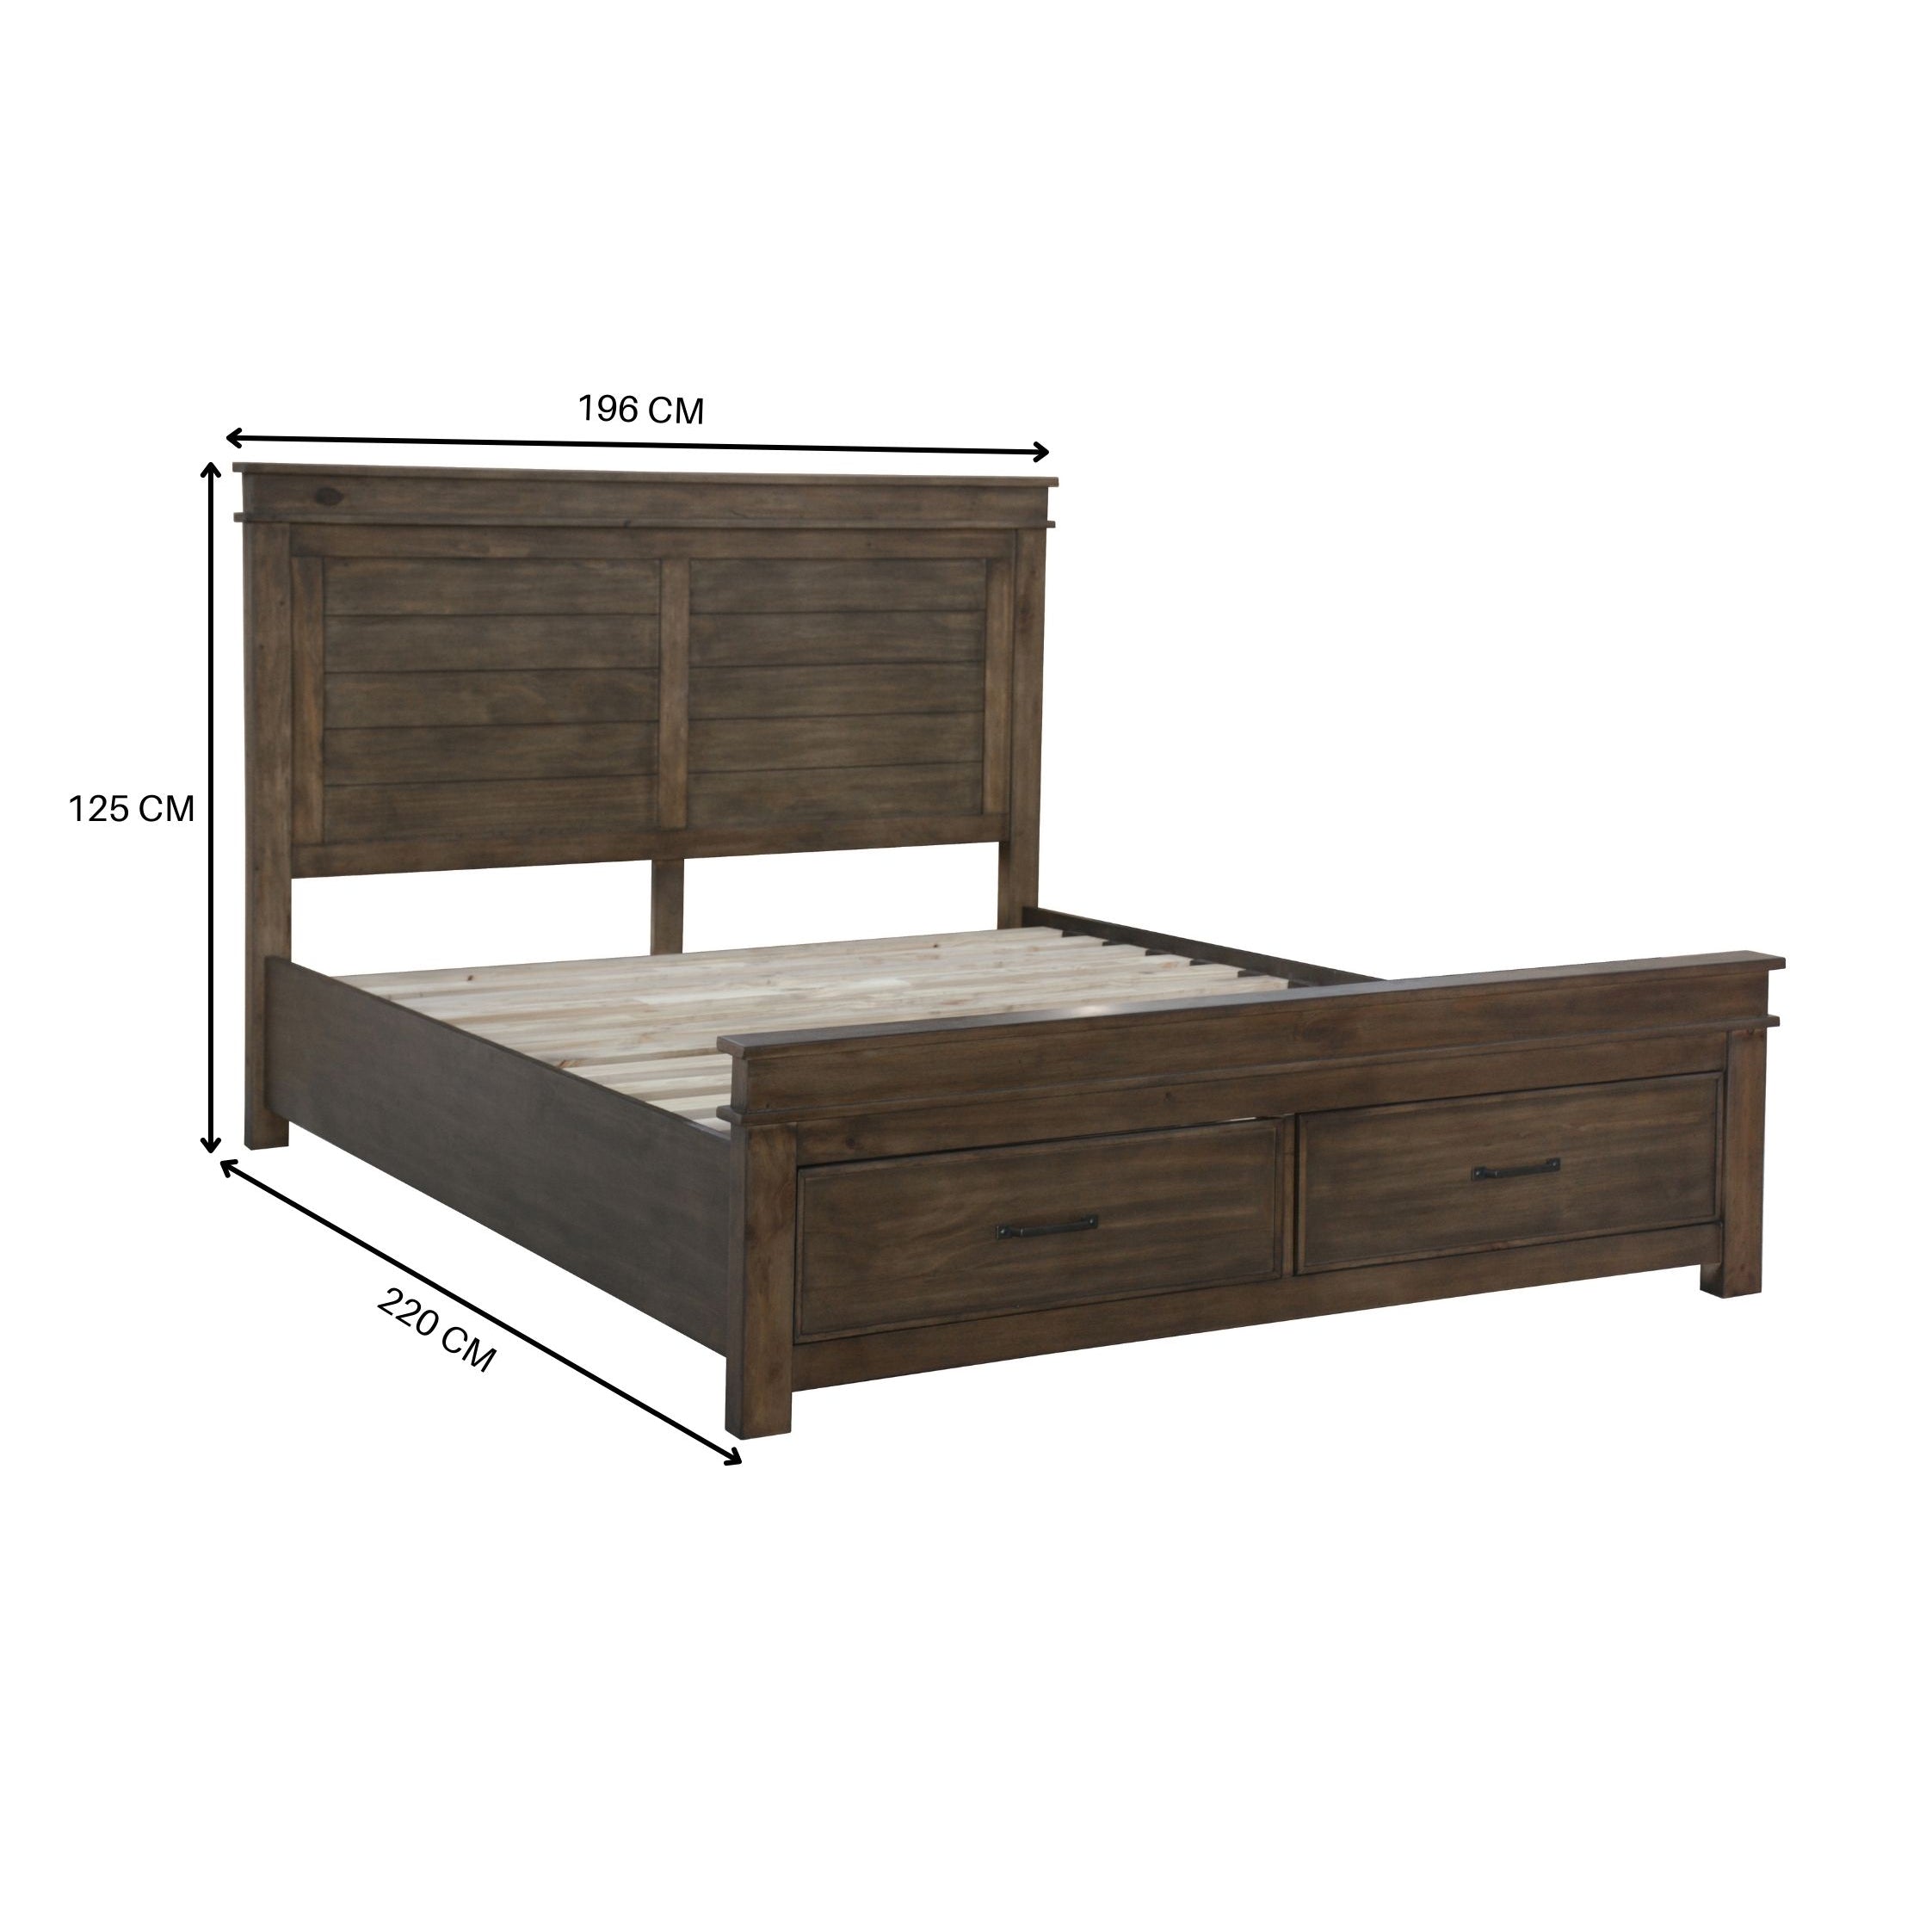 Lily Bed Frame King Size Timber Mattress Base With Storage Drawers - Rustic Grey Deals499